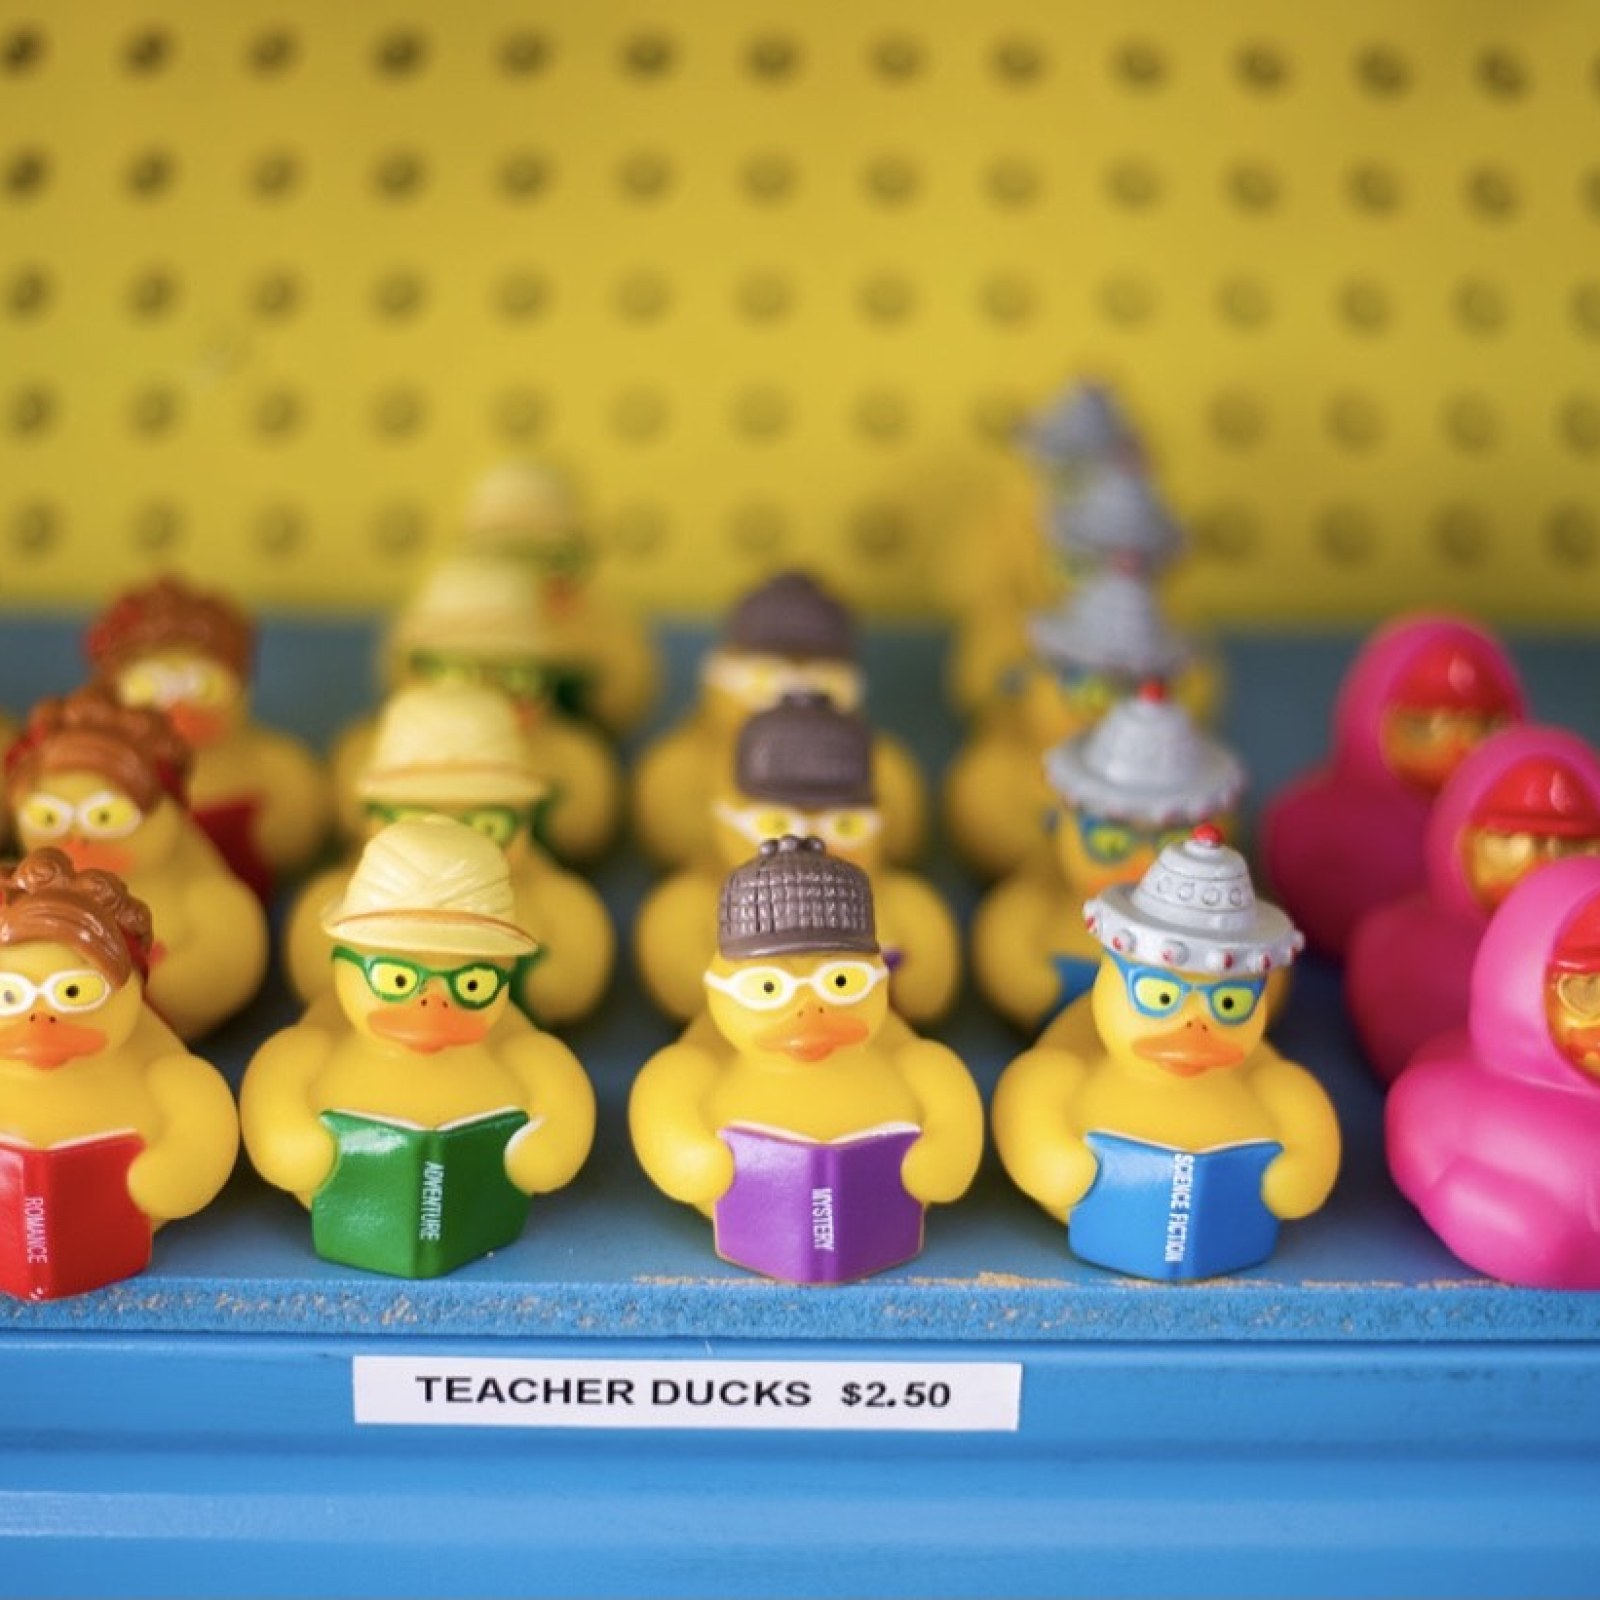 Tic-tac-toe, rubber ducks and the process of discovery